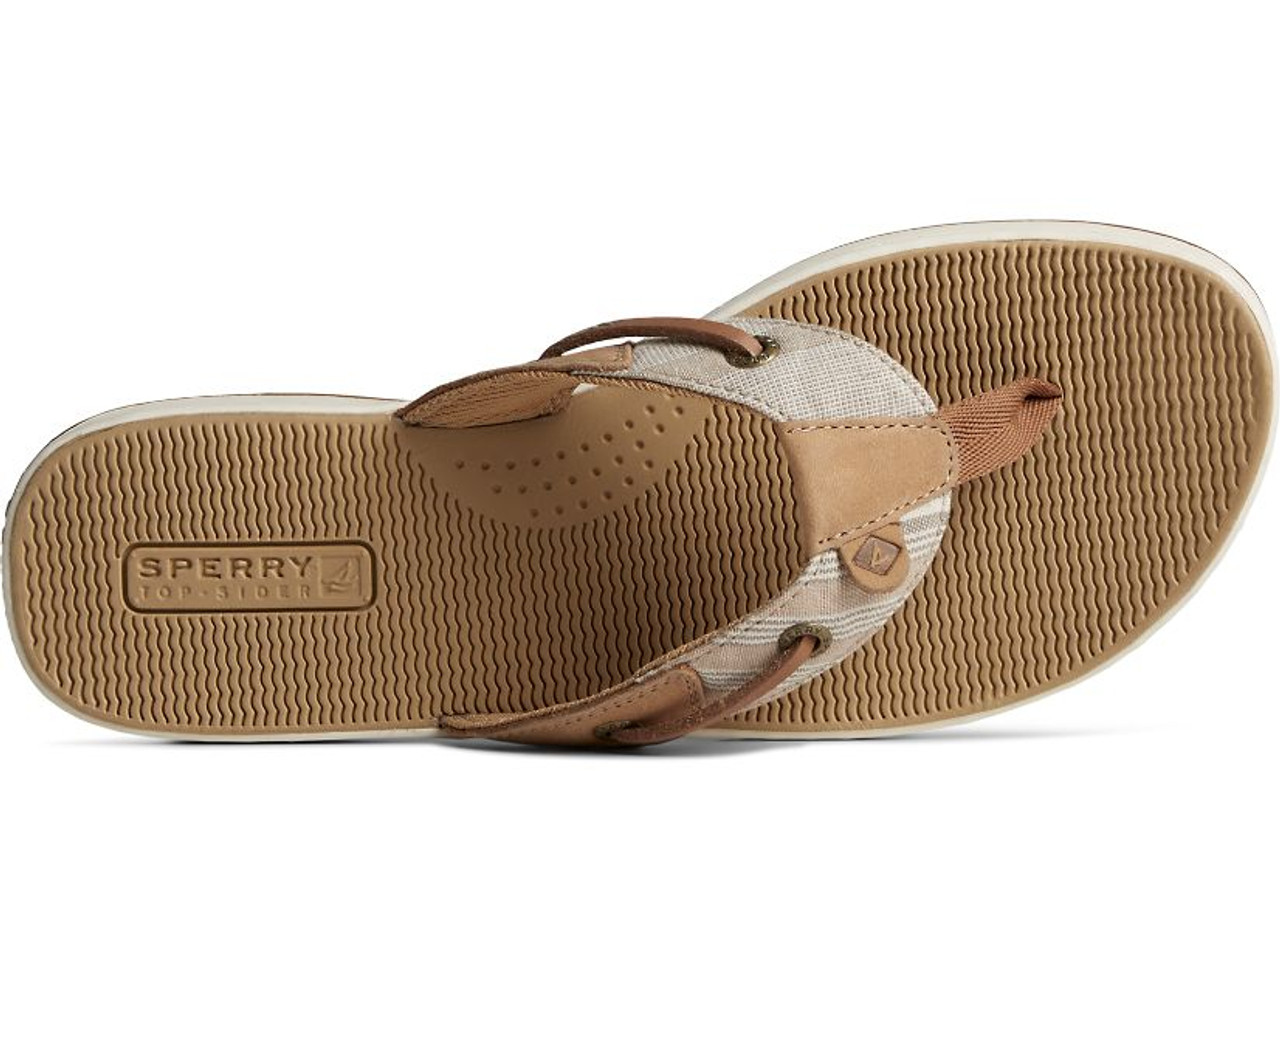 Amazon.com: Sperry Shoes For Women - Women's Sandals / Women's Shoes:  Clothing, Shoes & Jewelry